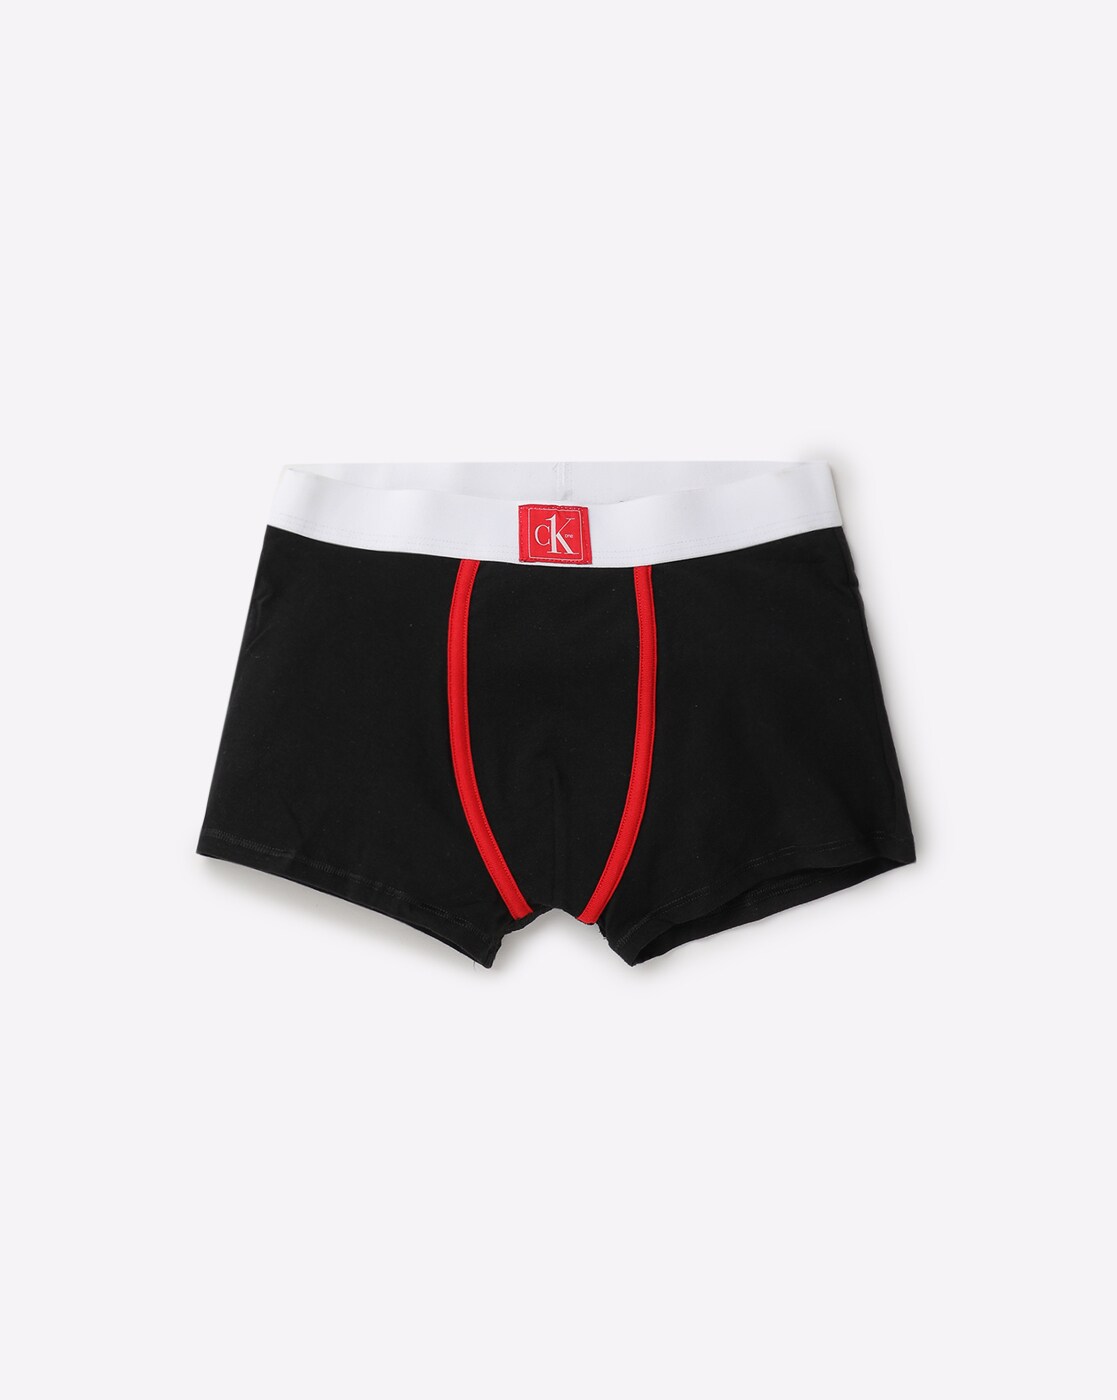 Calvin Klein Cotton Stretch Trunks, Pack of 2, Black/Red